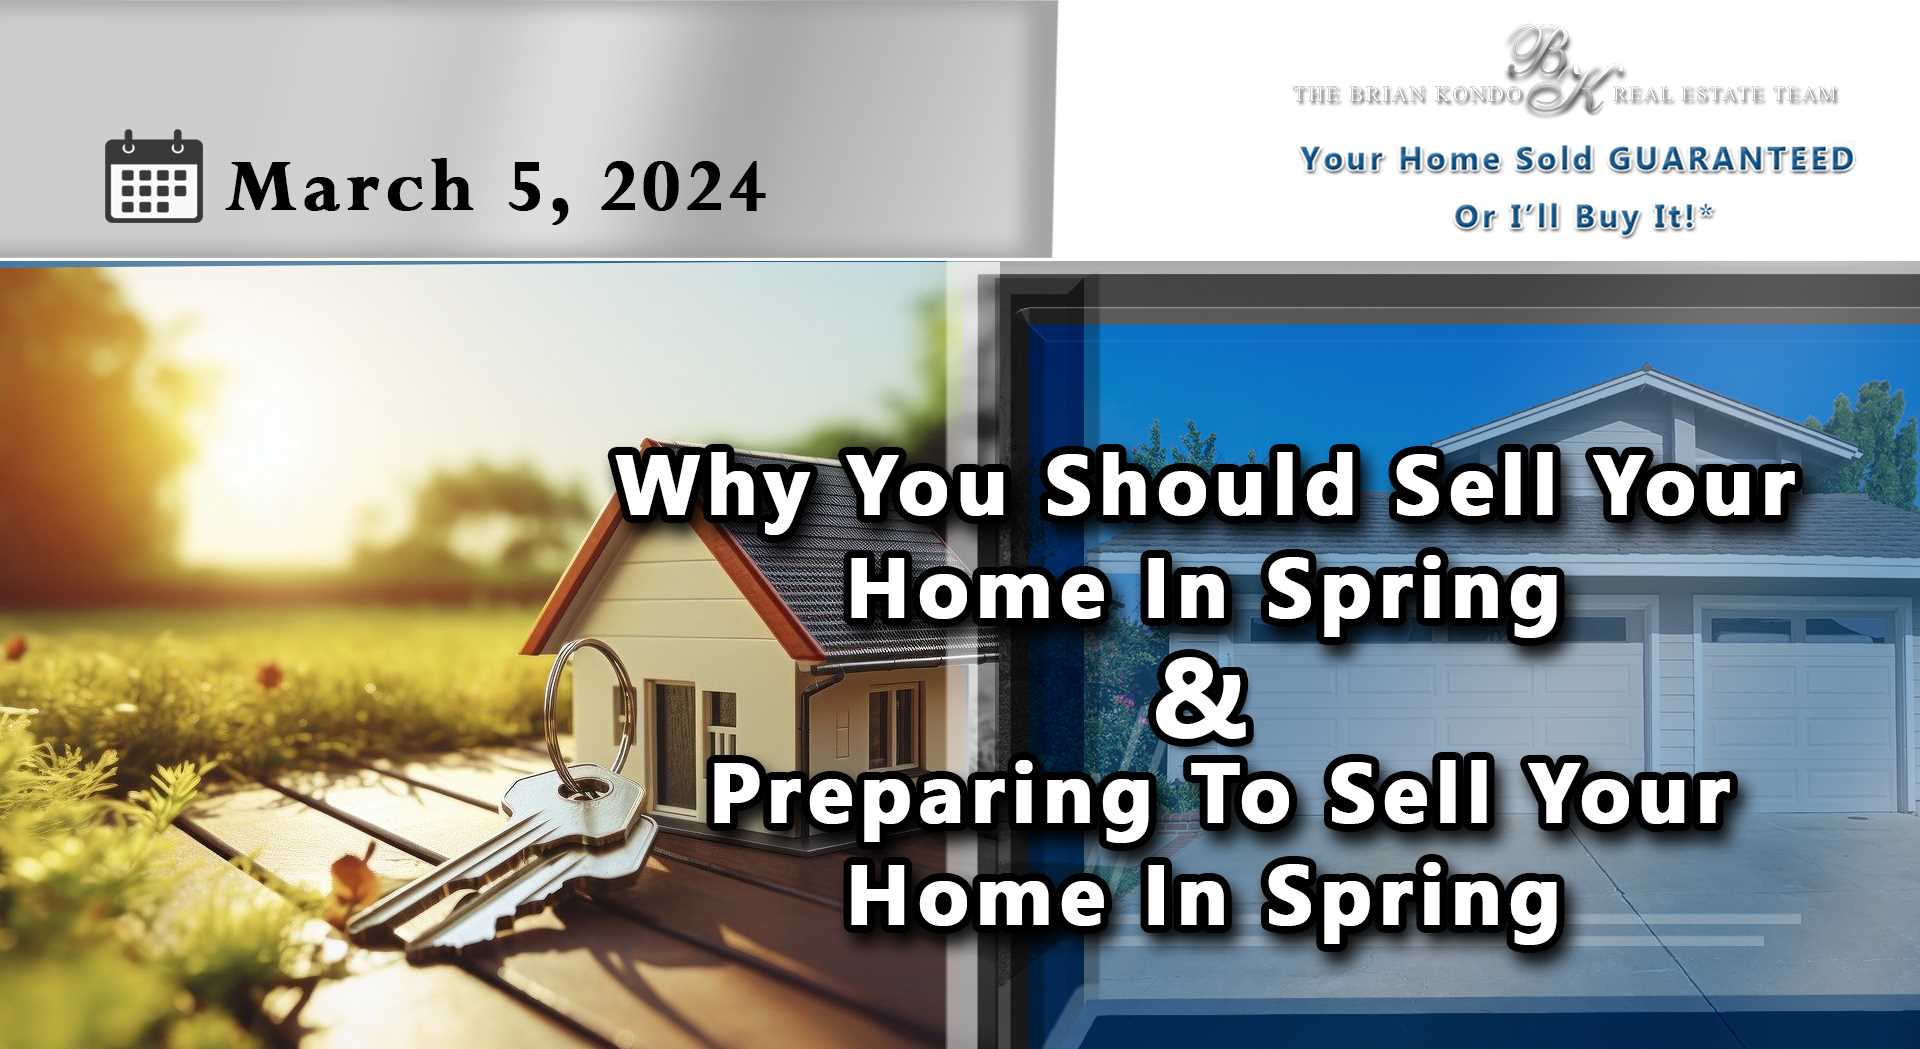 Why You Should Sell Your Home In Spring & Preparing To Sell Your Home In Spring